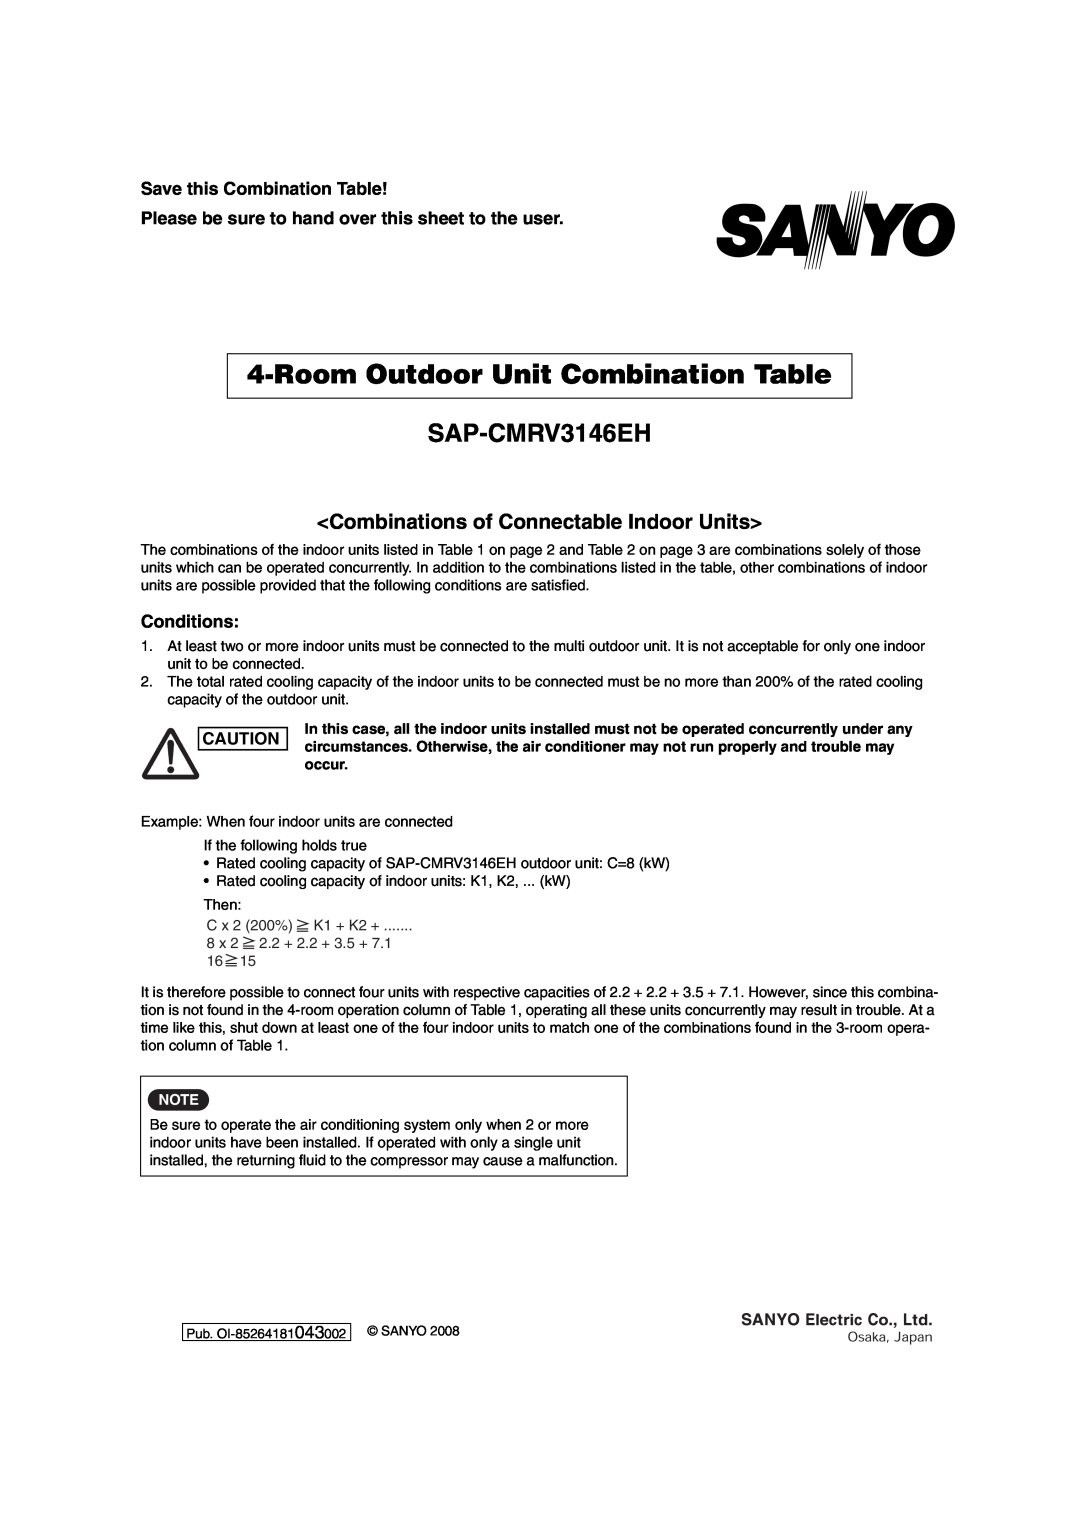 Sanyo SAP-CMRV1926EH SAP-CMRV3146EH, RoomOutdoor Unit Combination Table, Combinations of Connectable Indoor Units 